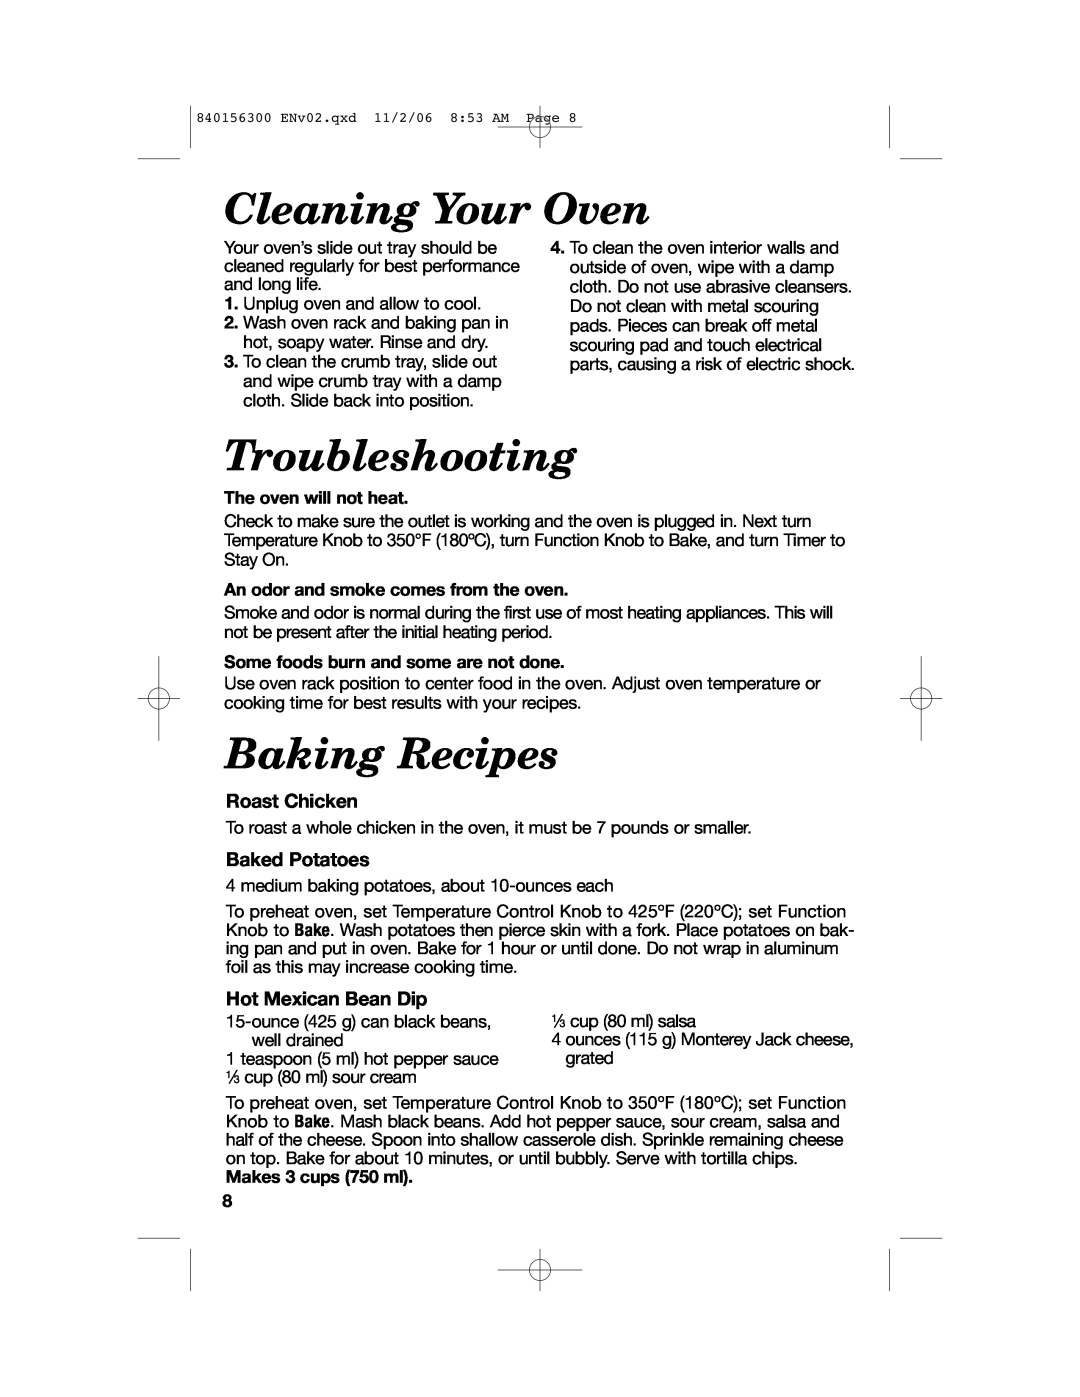 Hamilton Beach 840156300 manual Cleaning Your Oven, Troubleshooting, Baking Recipes, Roast Chicken, Baked Potatoes 